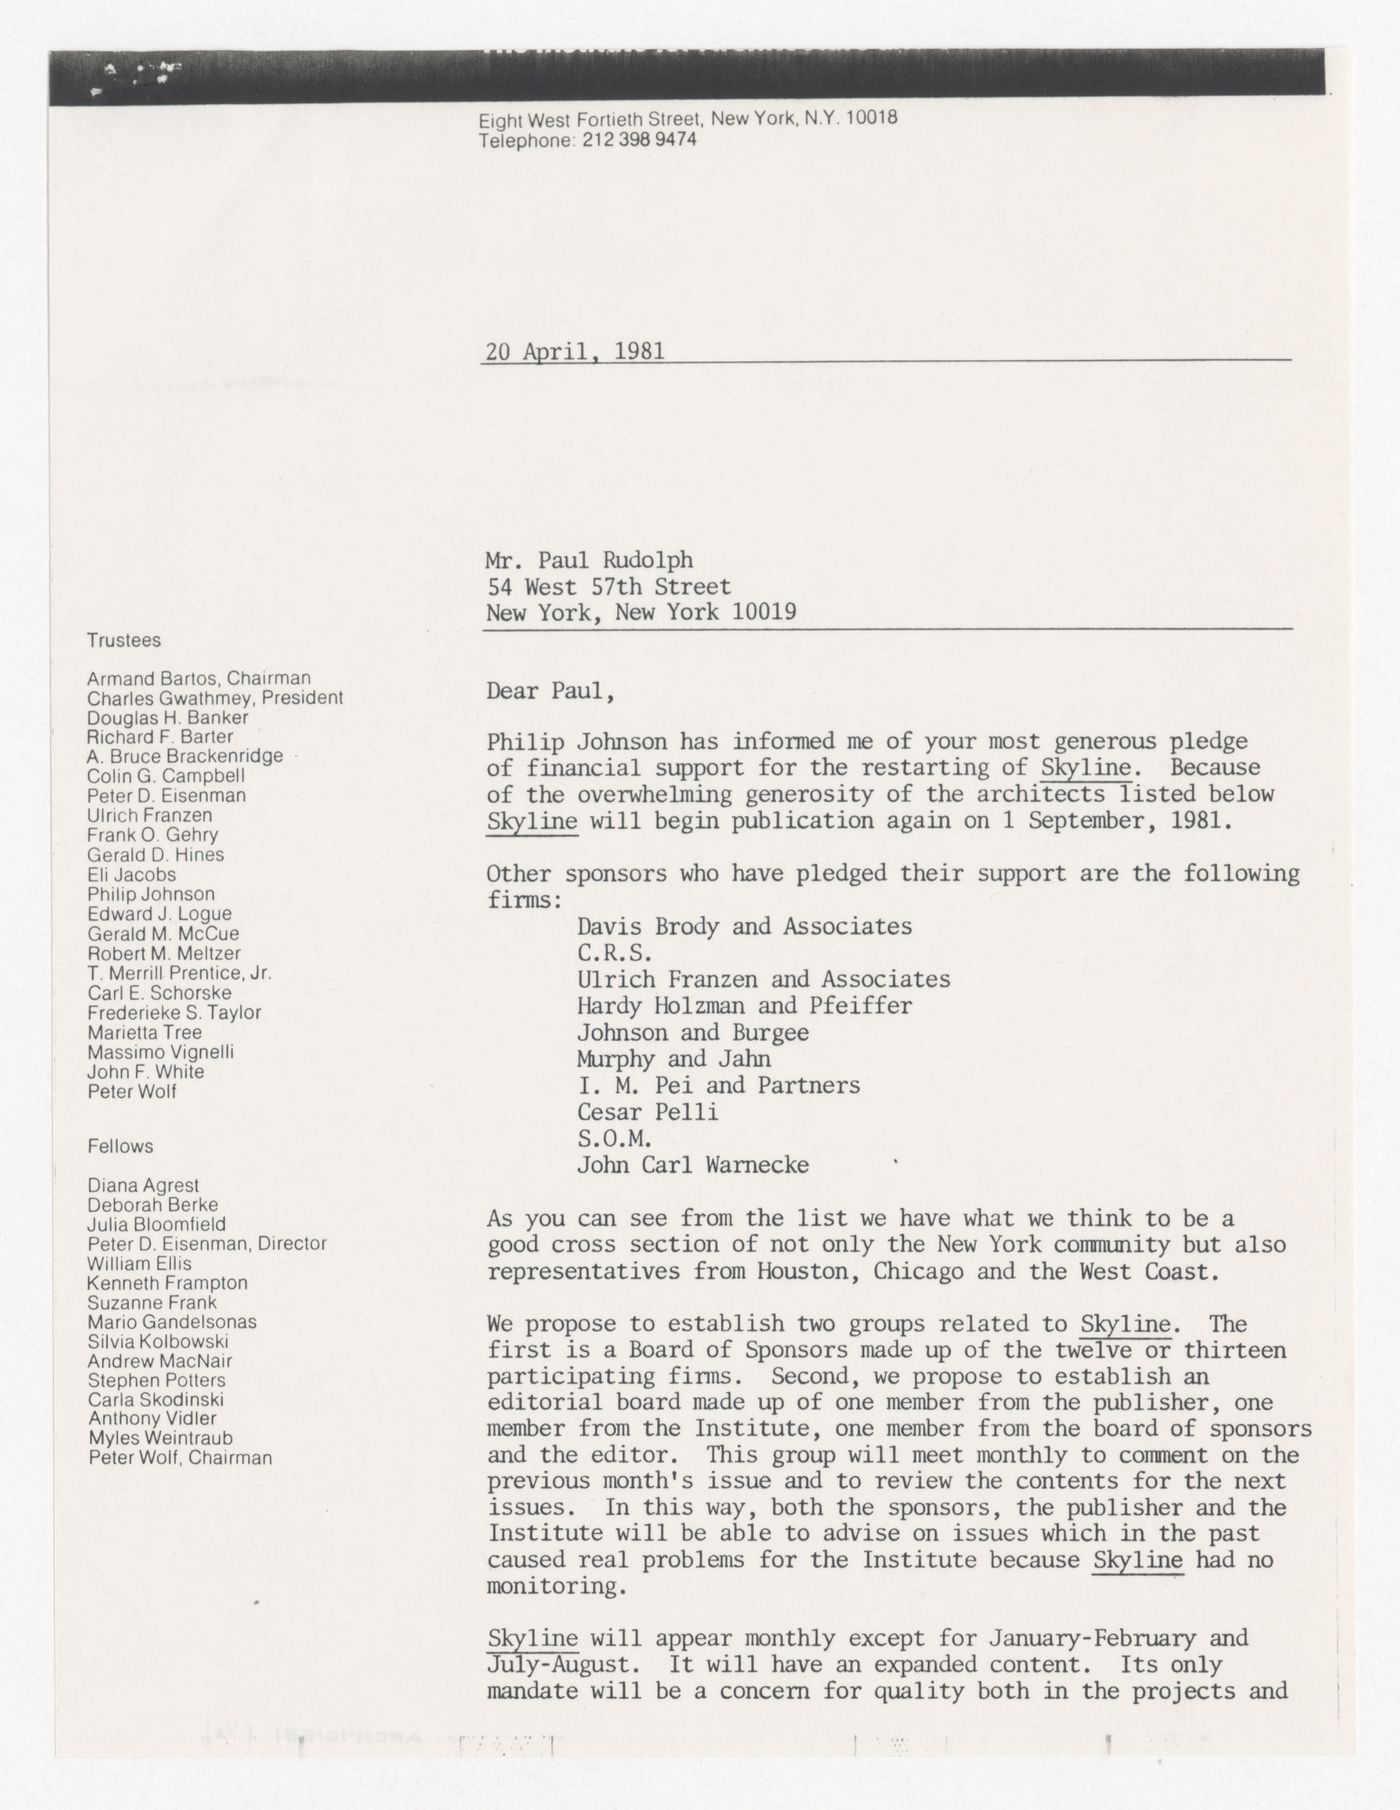 Letter from Peter D. Eisenman to Paul Rudolph about sponsorship for Skyline